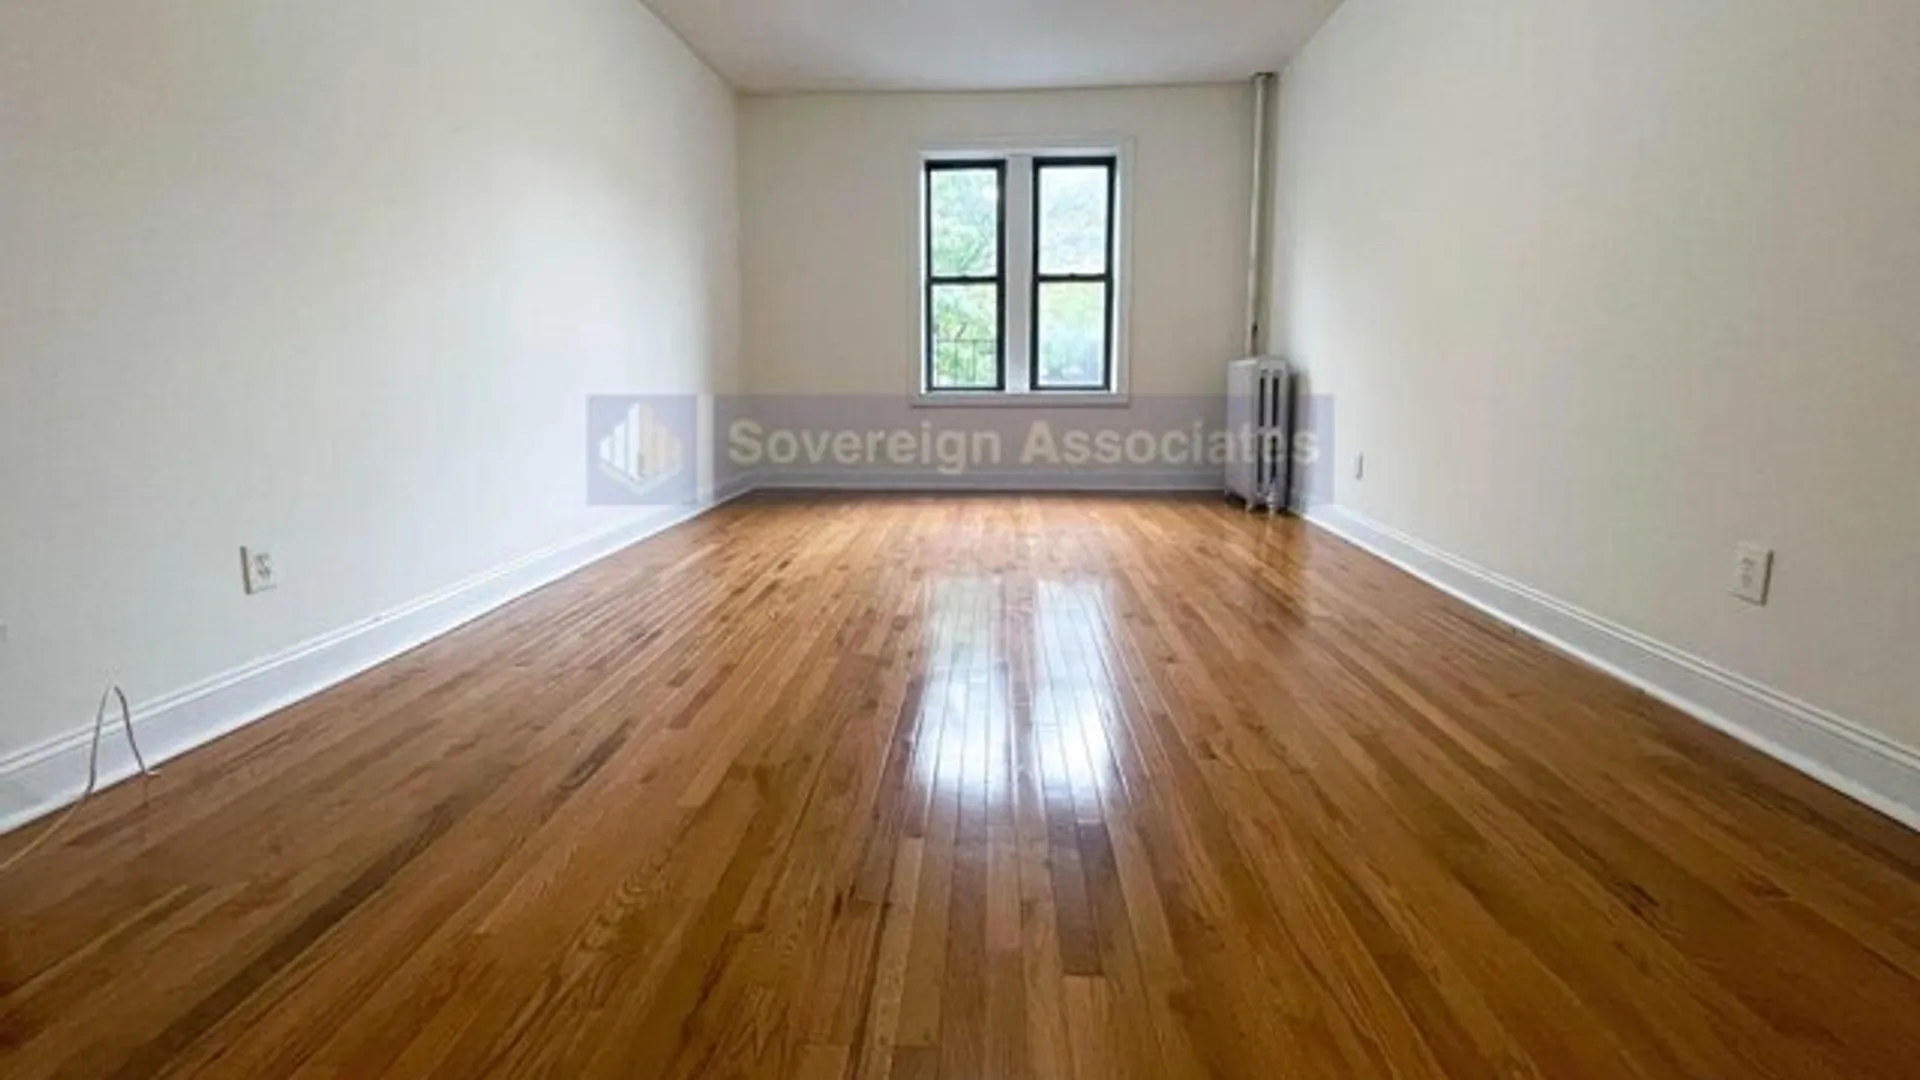 106 Fort Washington Avenue, New York, NY 10032, USA | 3 bed apartment for rent